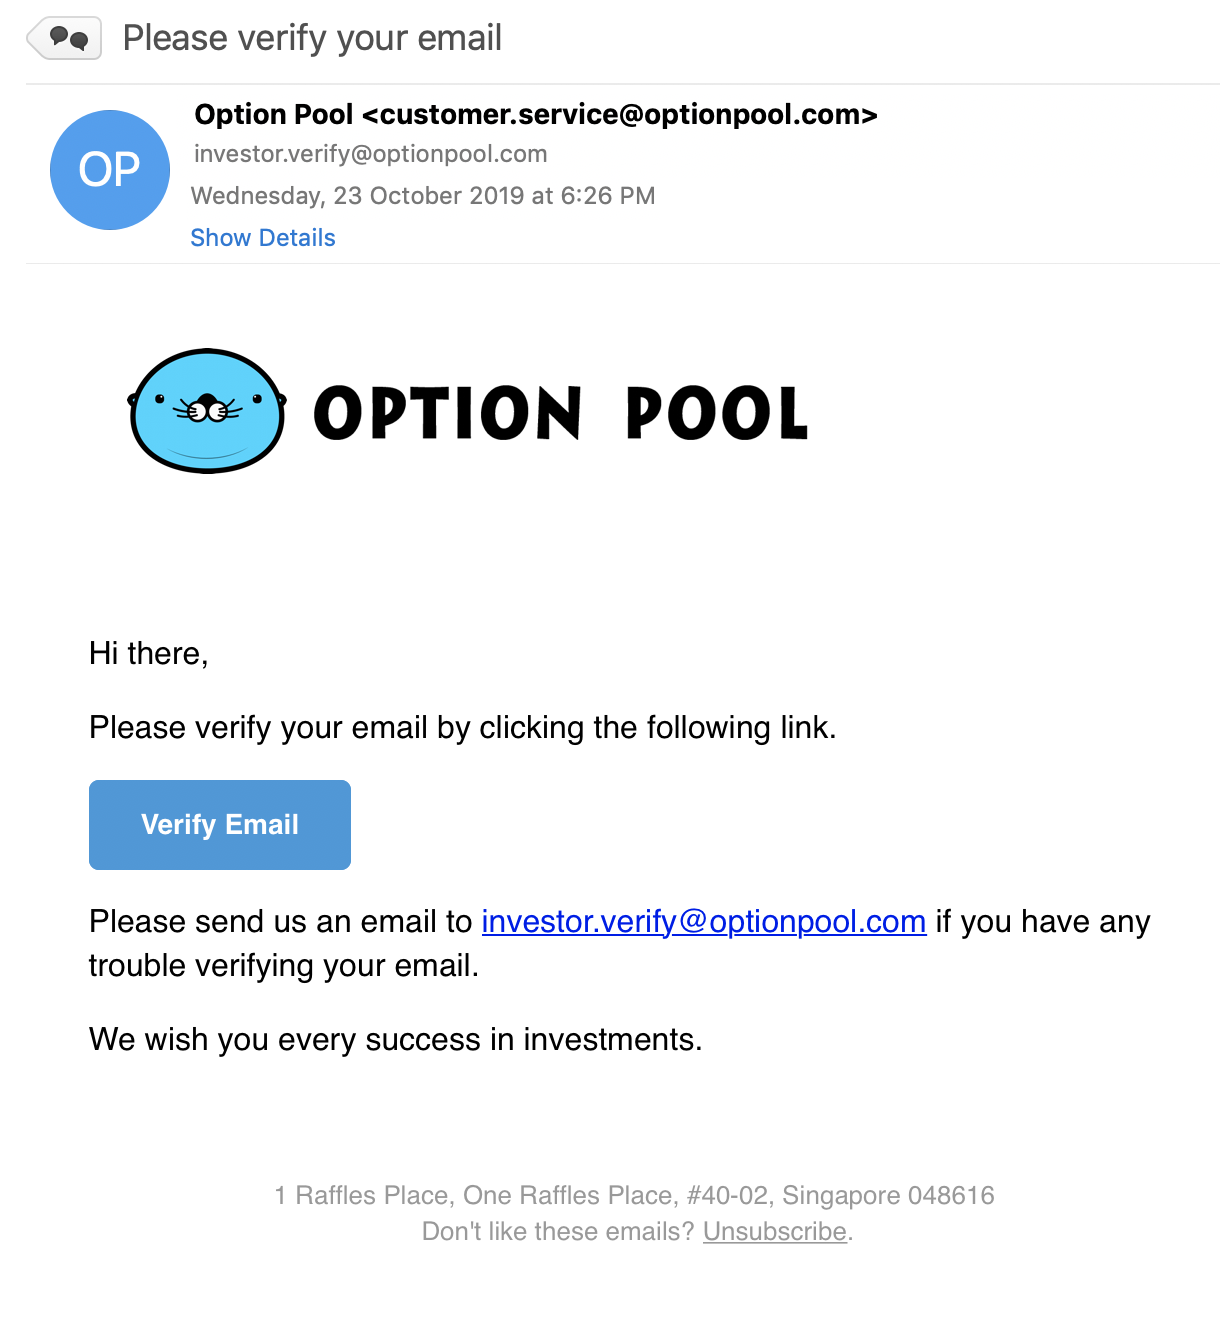 verification request email sent from Option Pool